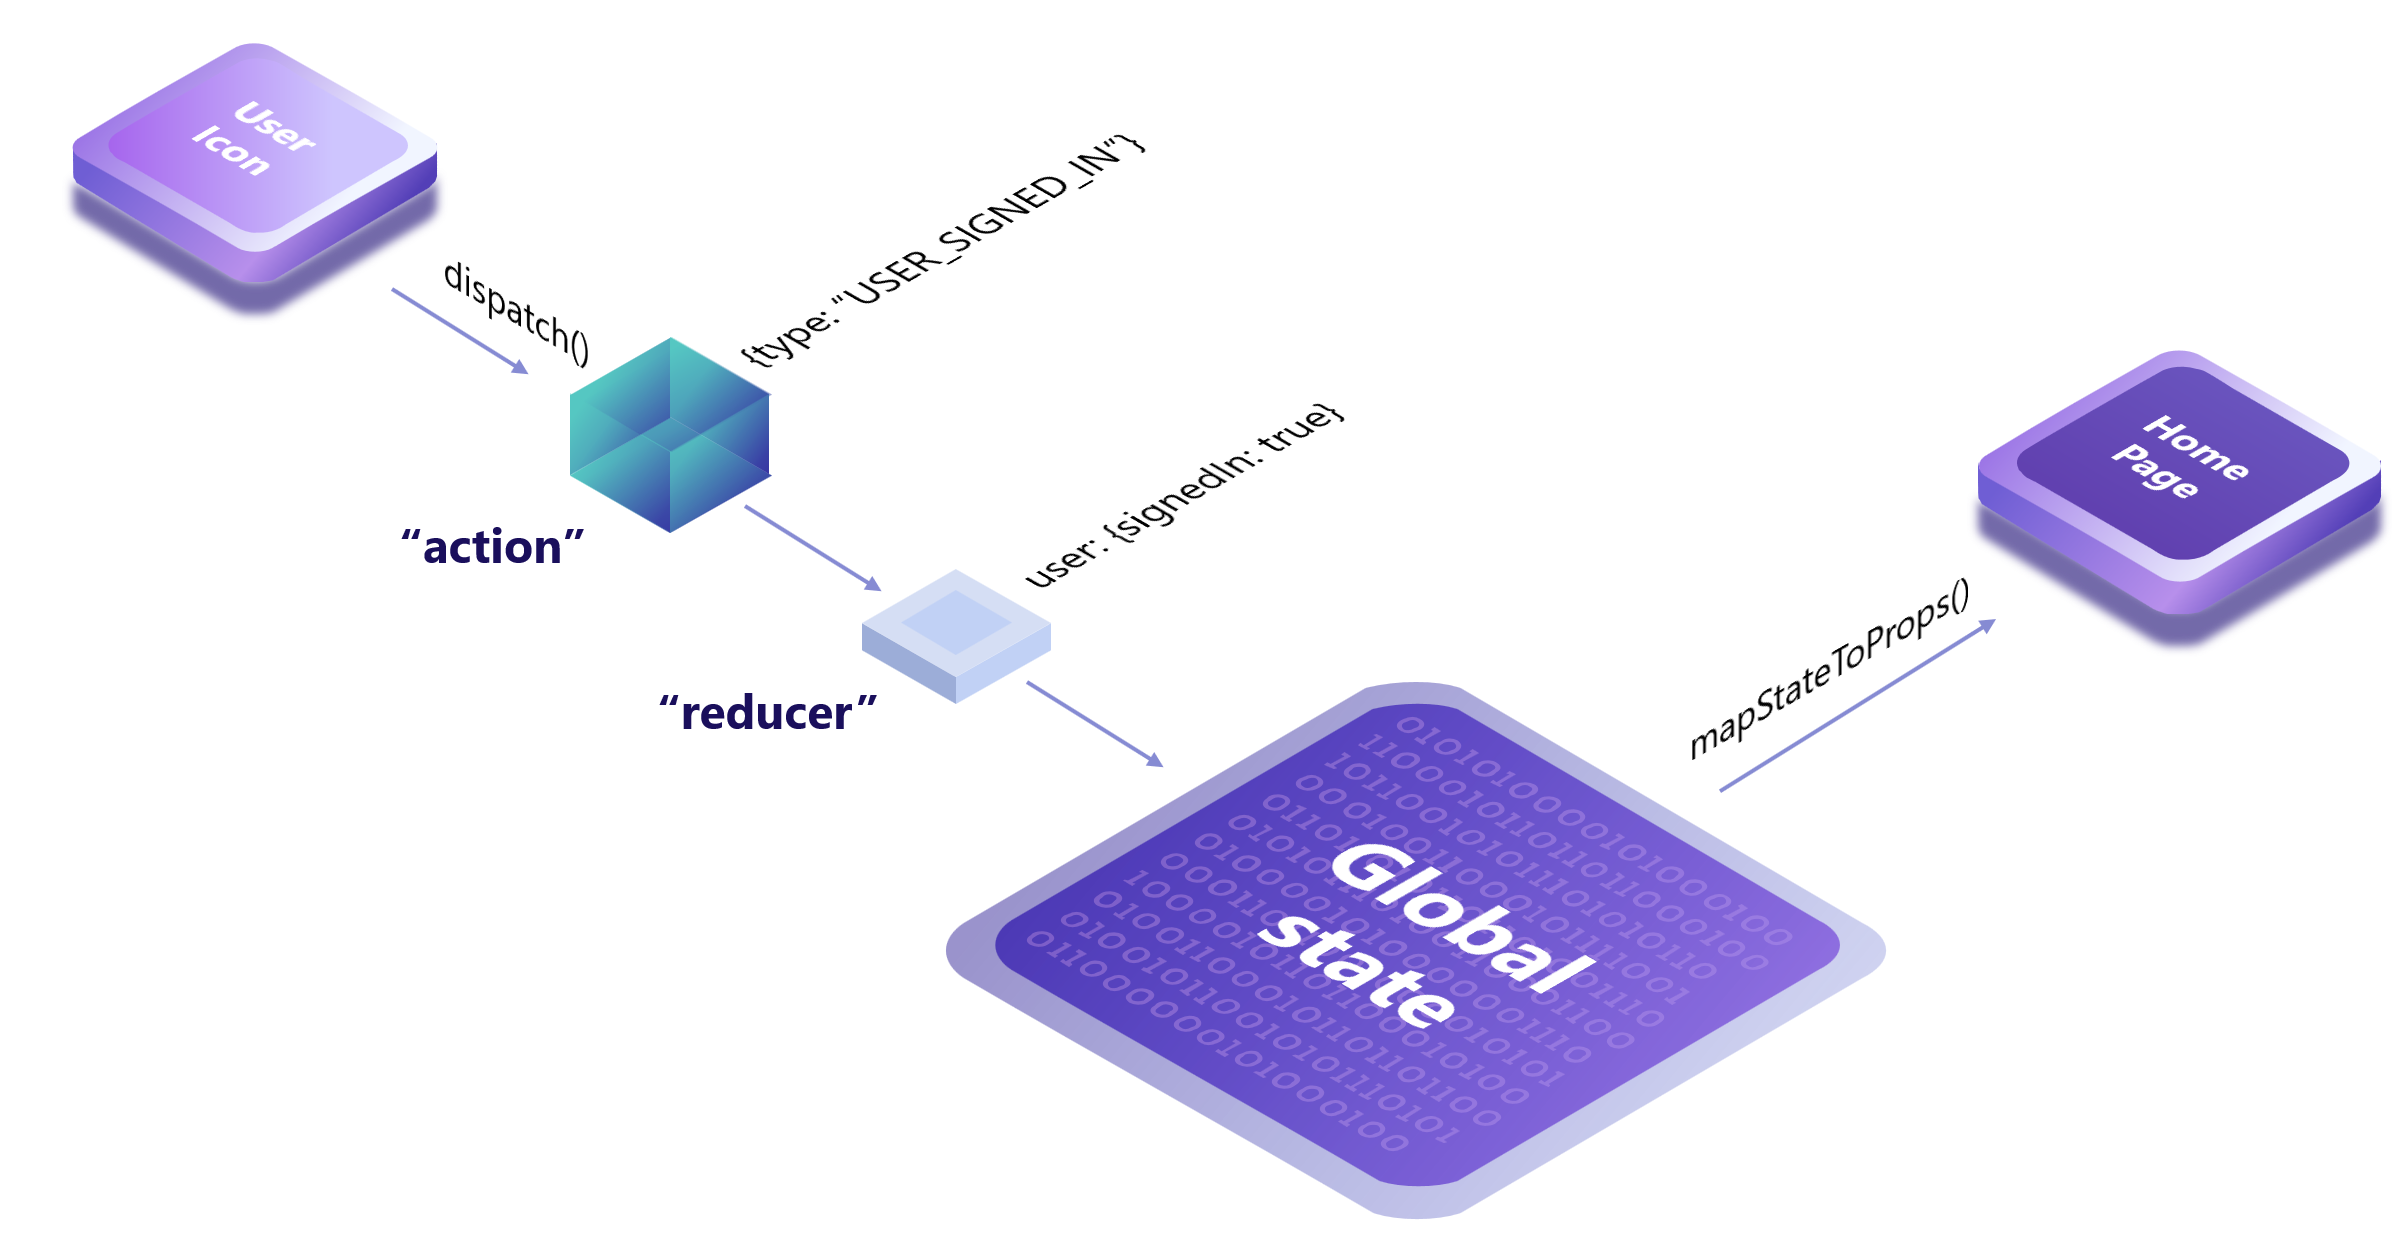 Redux global state update and propagation